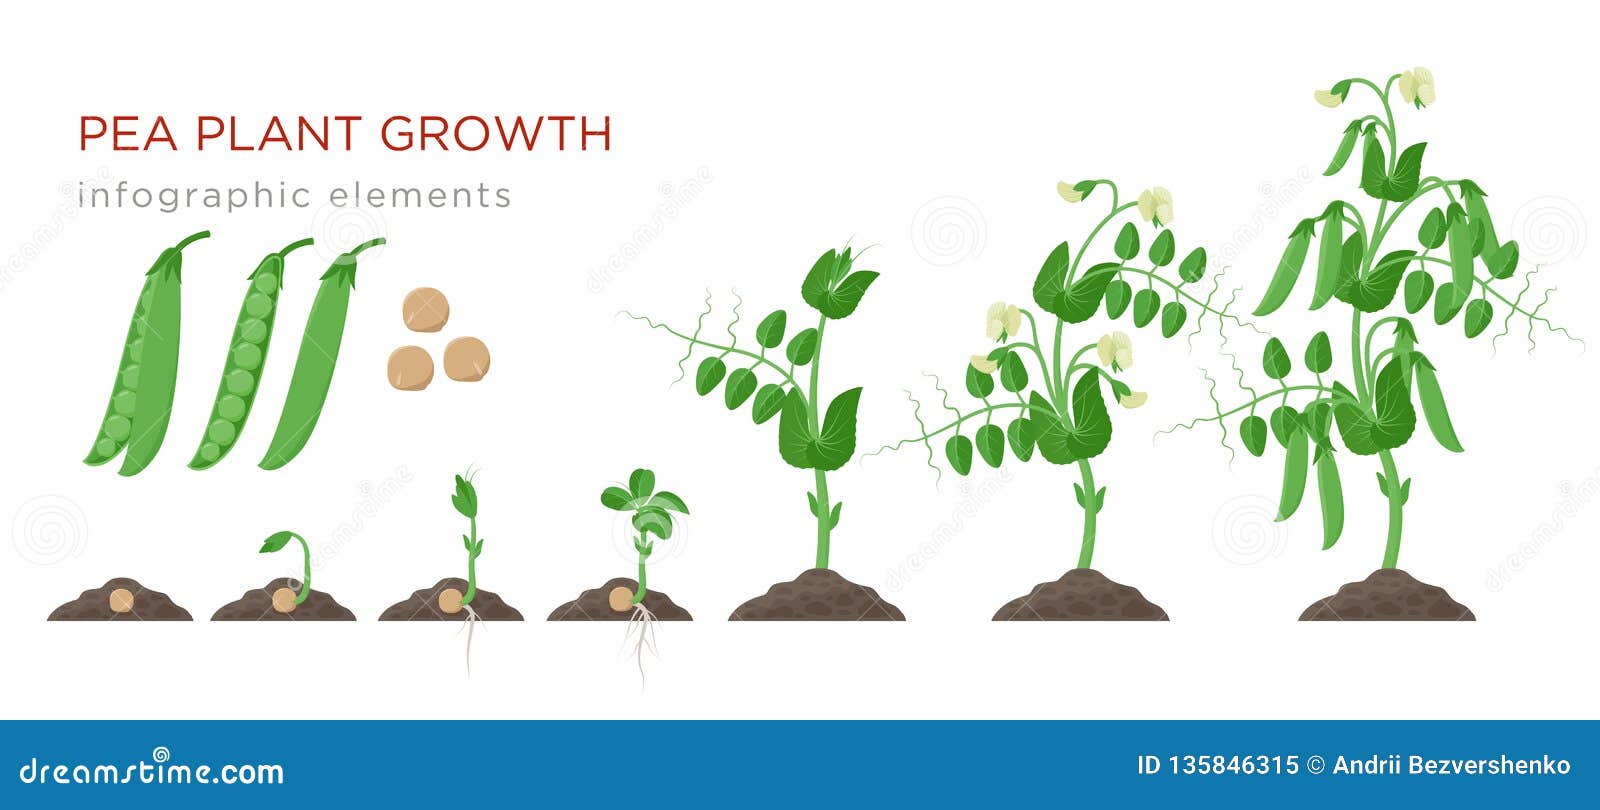 Pea Plant Growth Chart